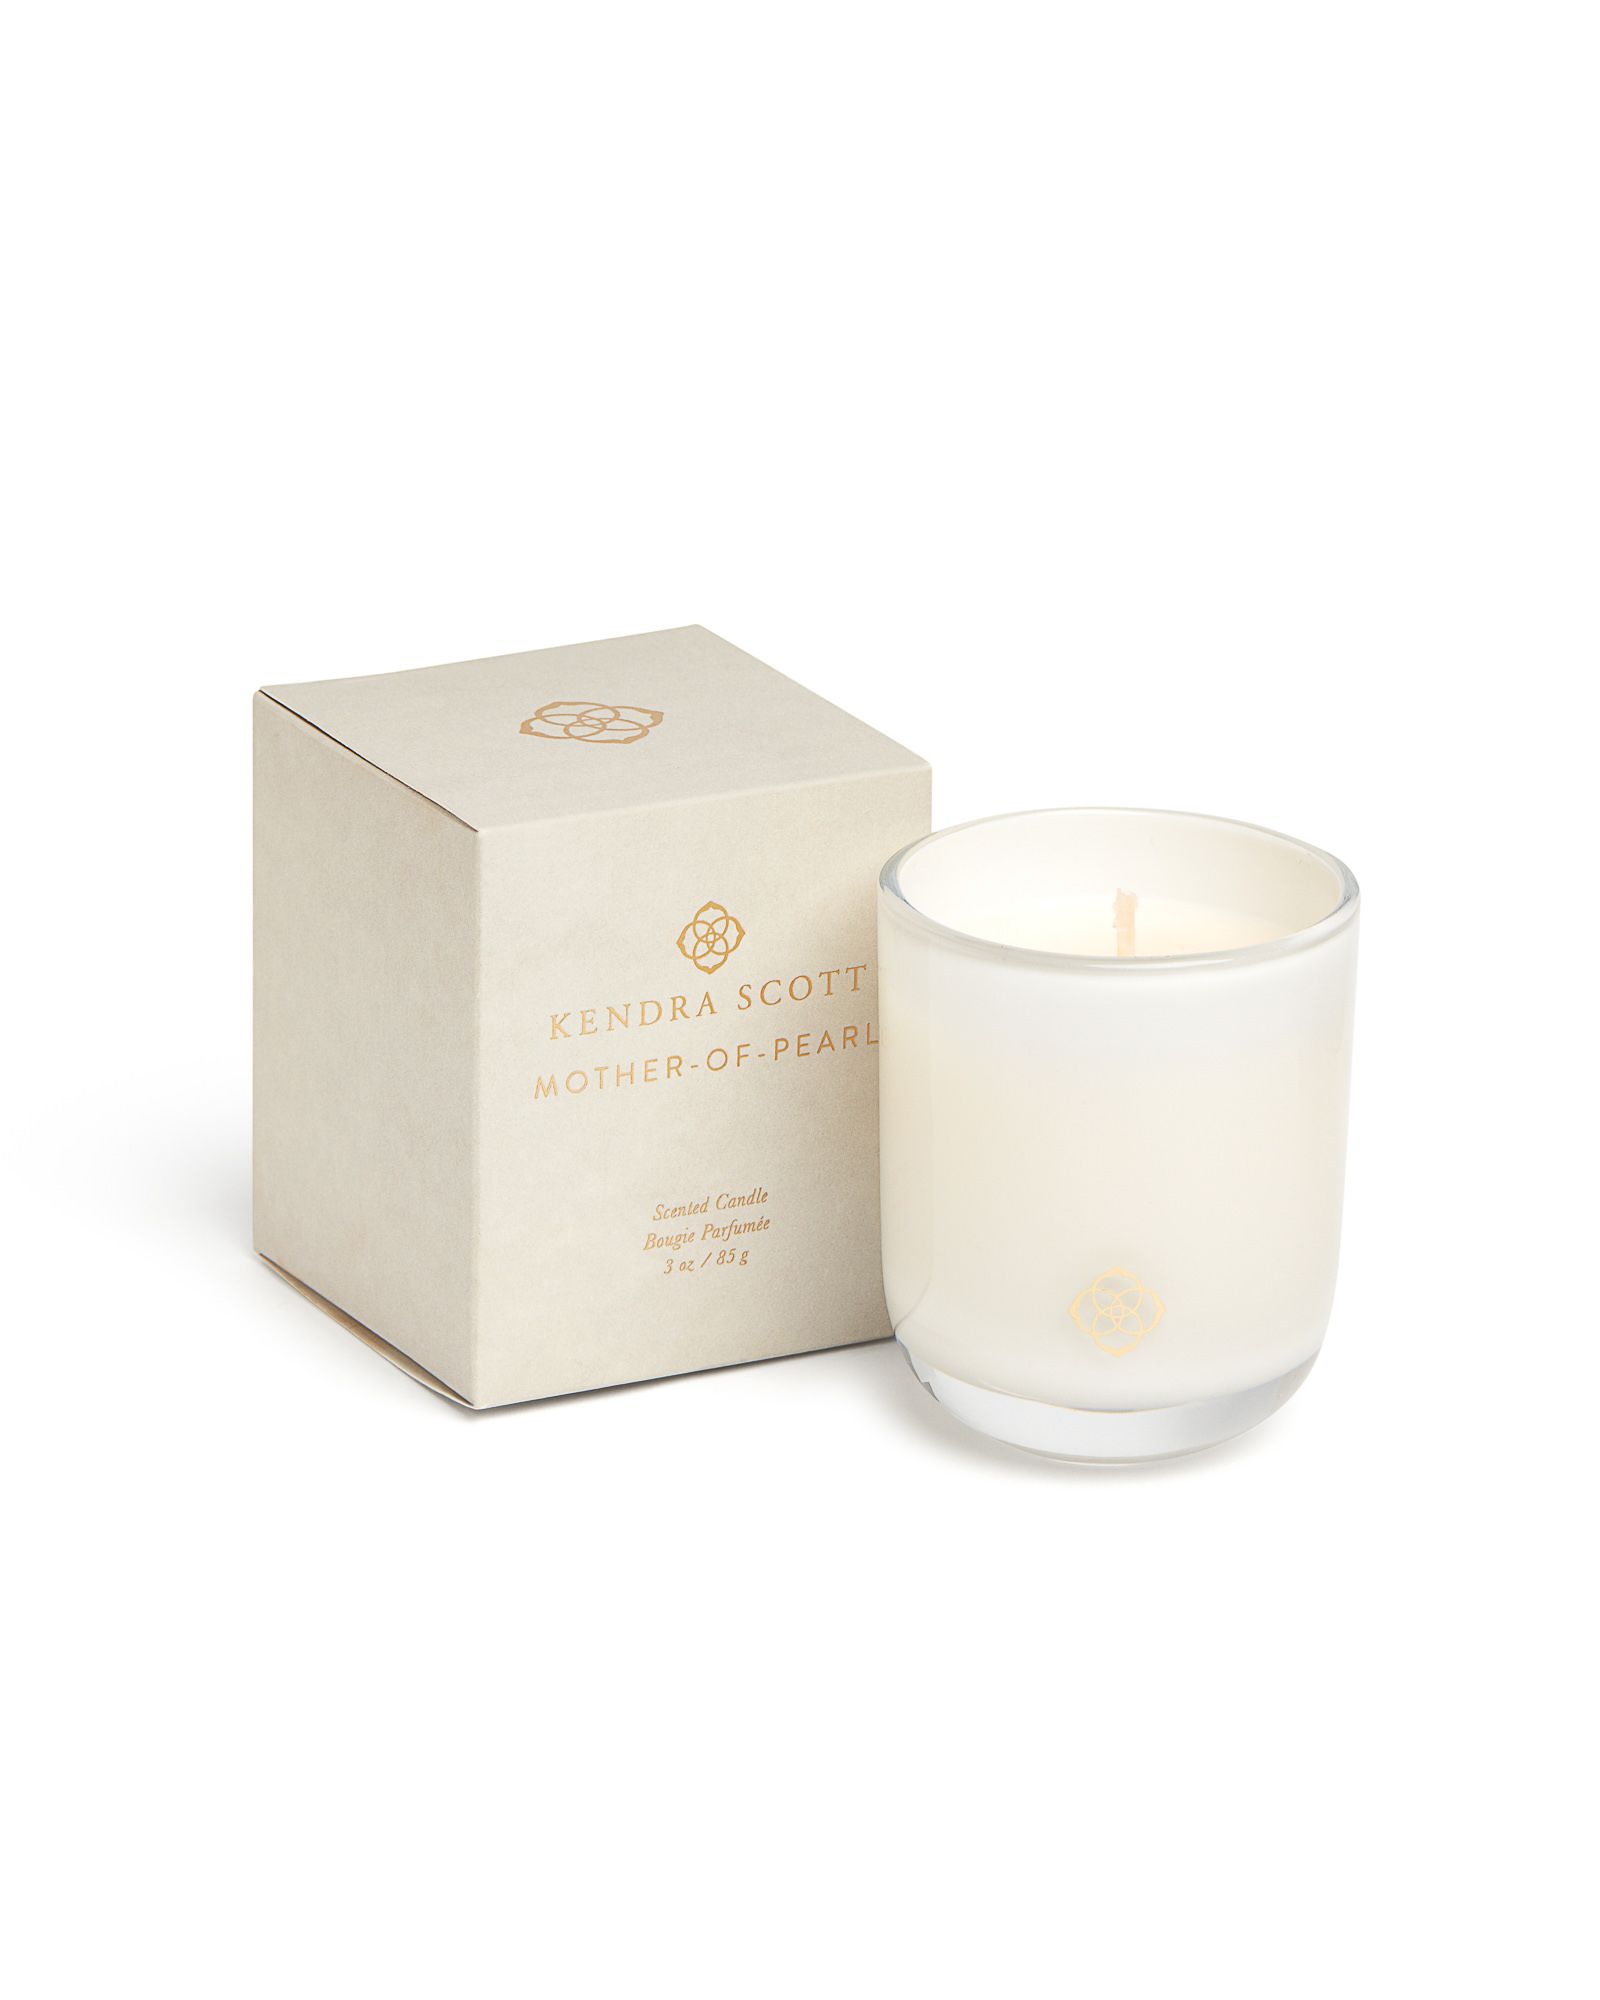 Mother-of-Pearl Small Votive Candle | Kendra Scott